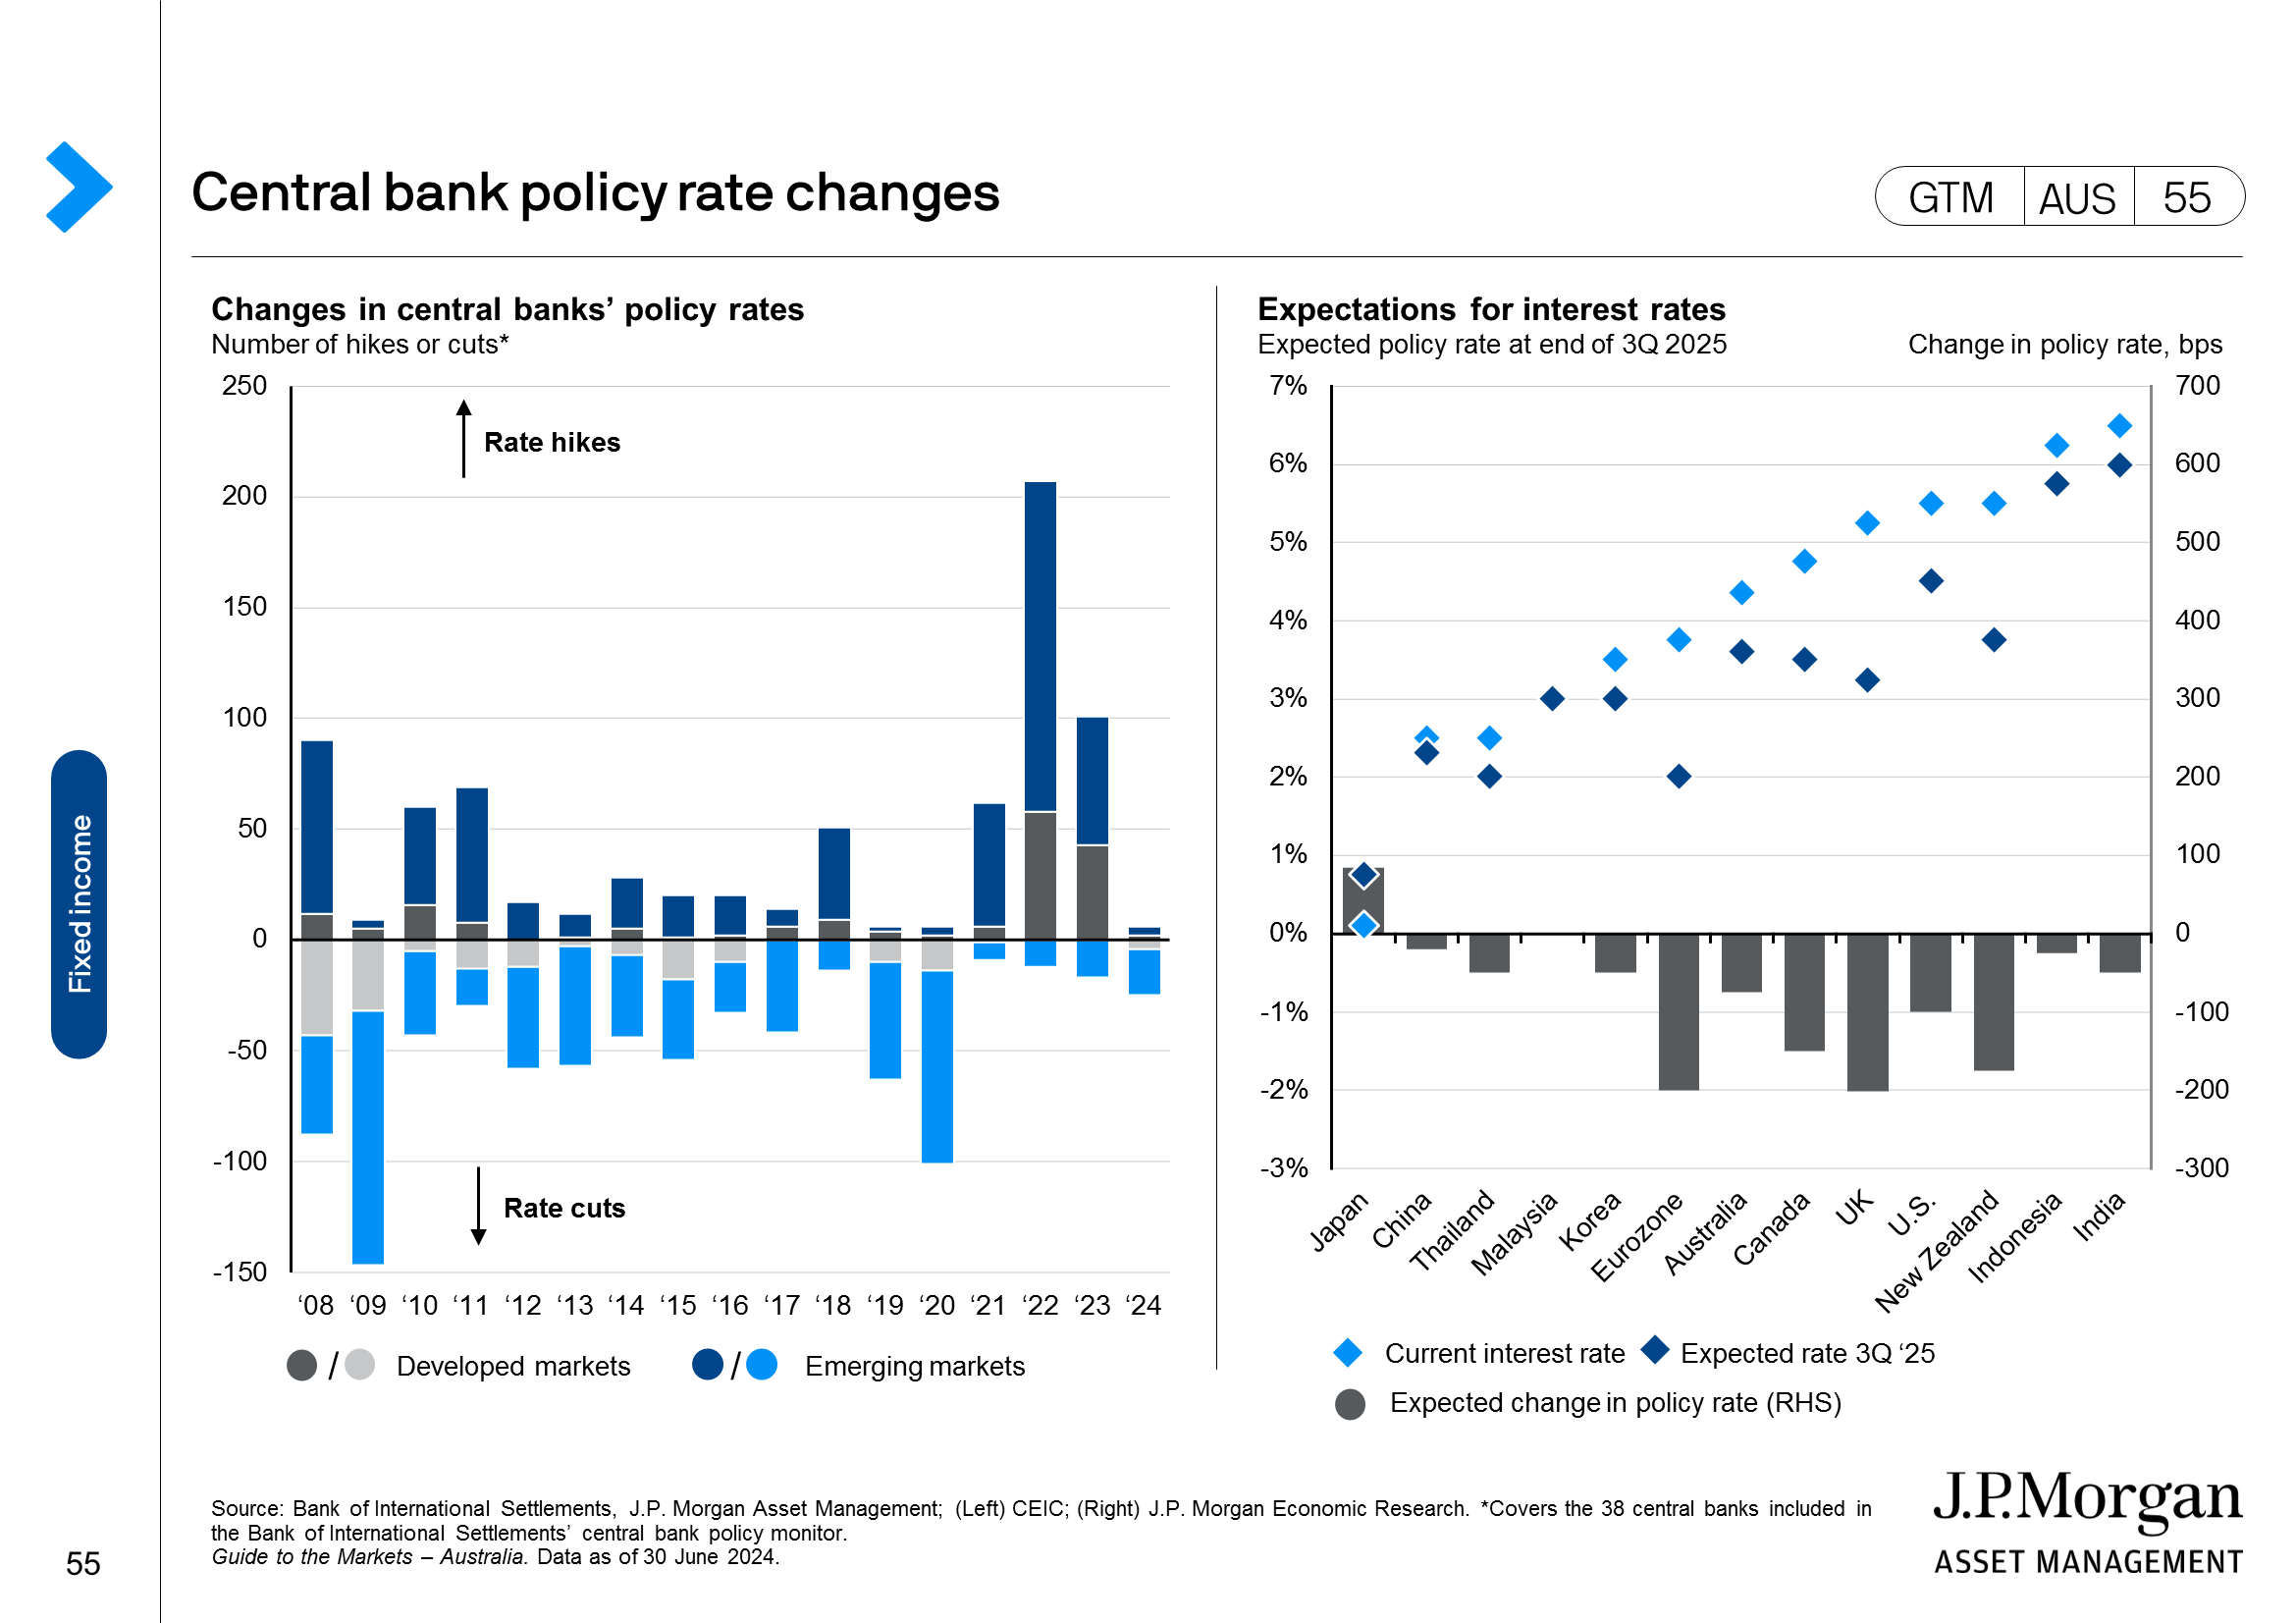 Central bank policy rates